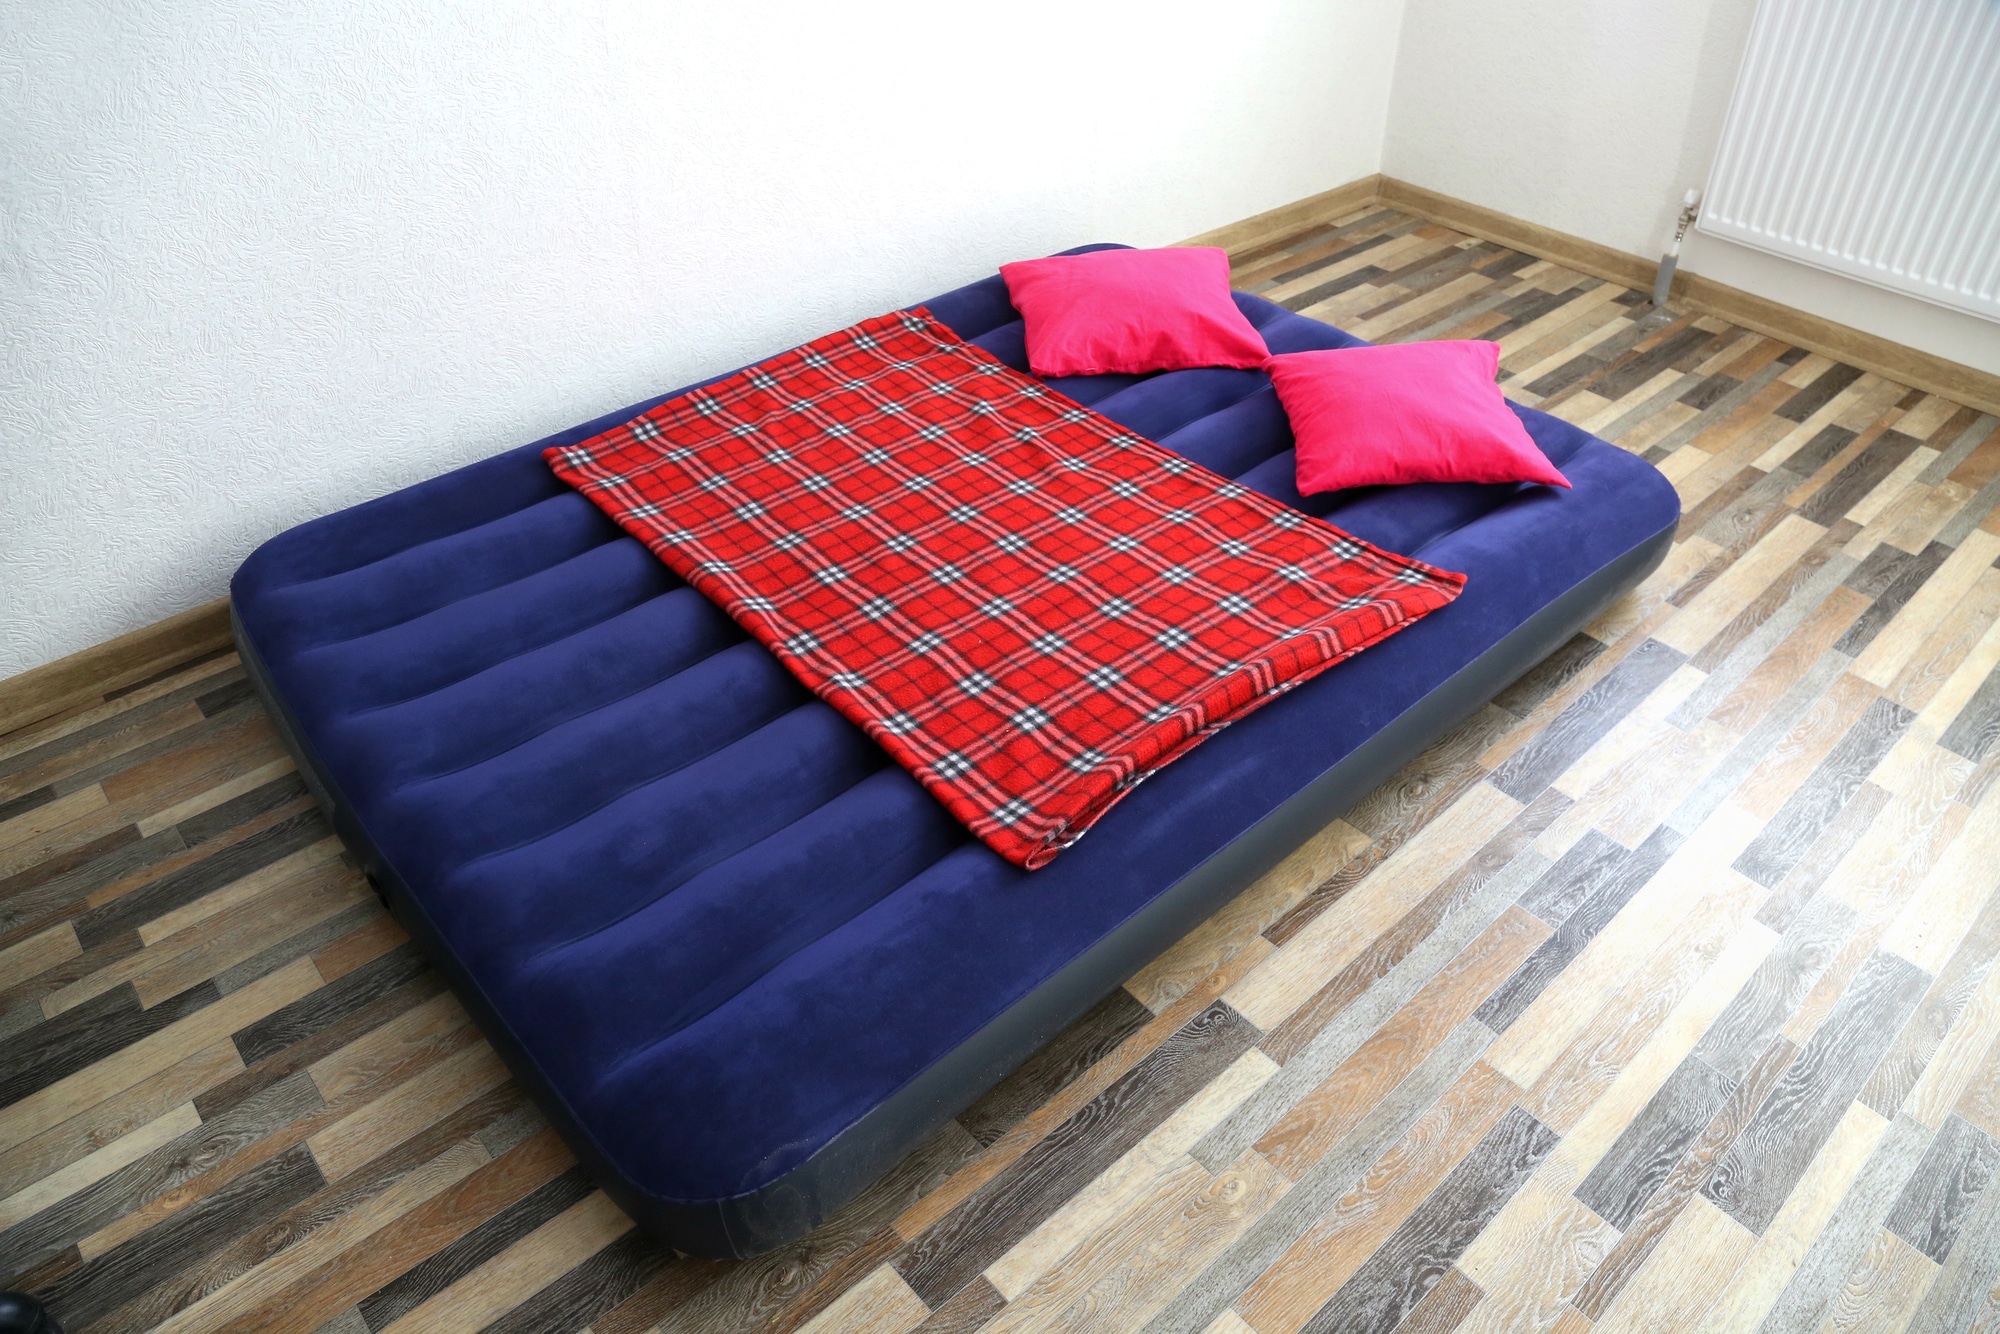 air mattress with a red blanket and pillows